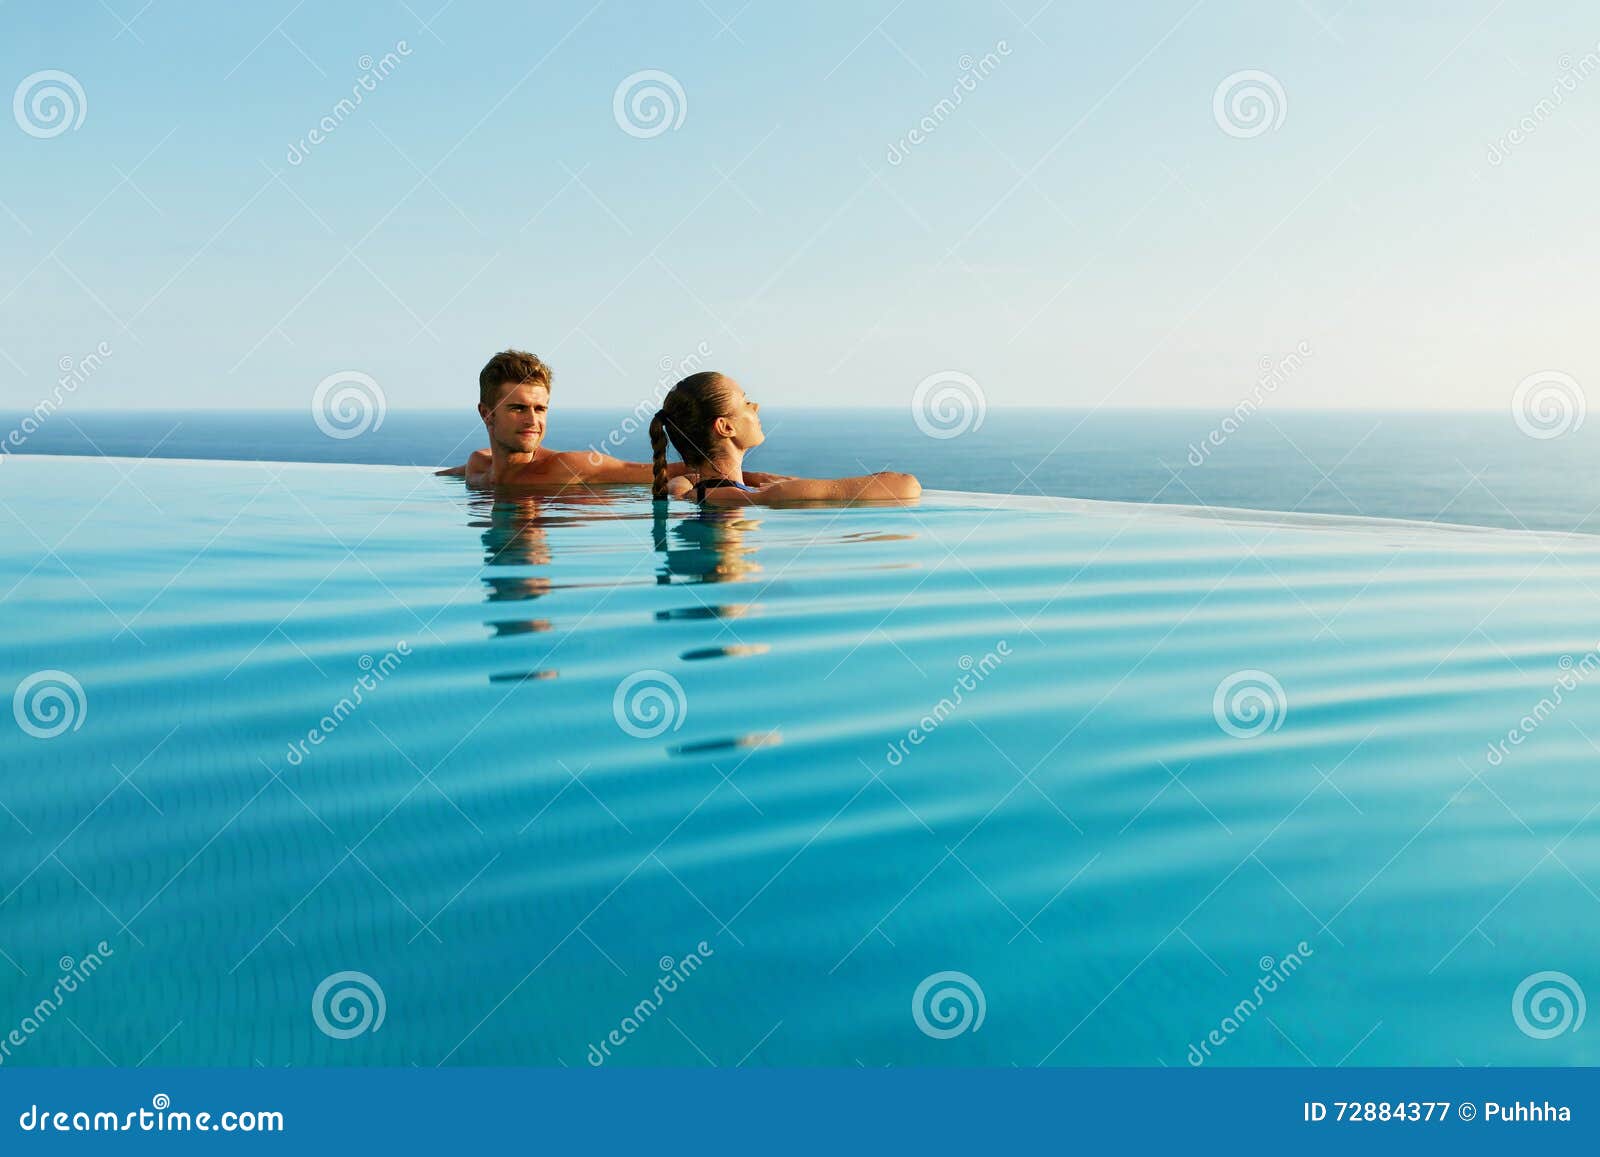 couple in love in luxury resort pool on romantic summer vacation